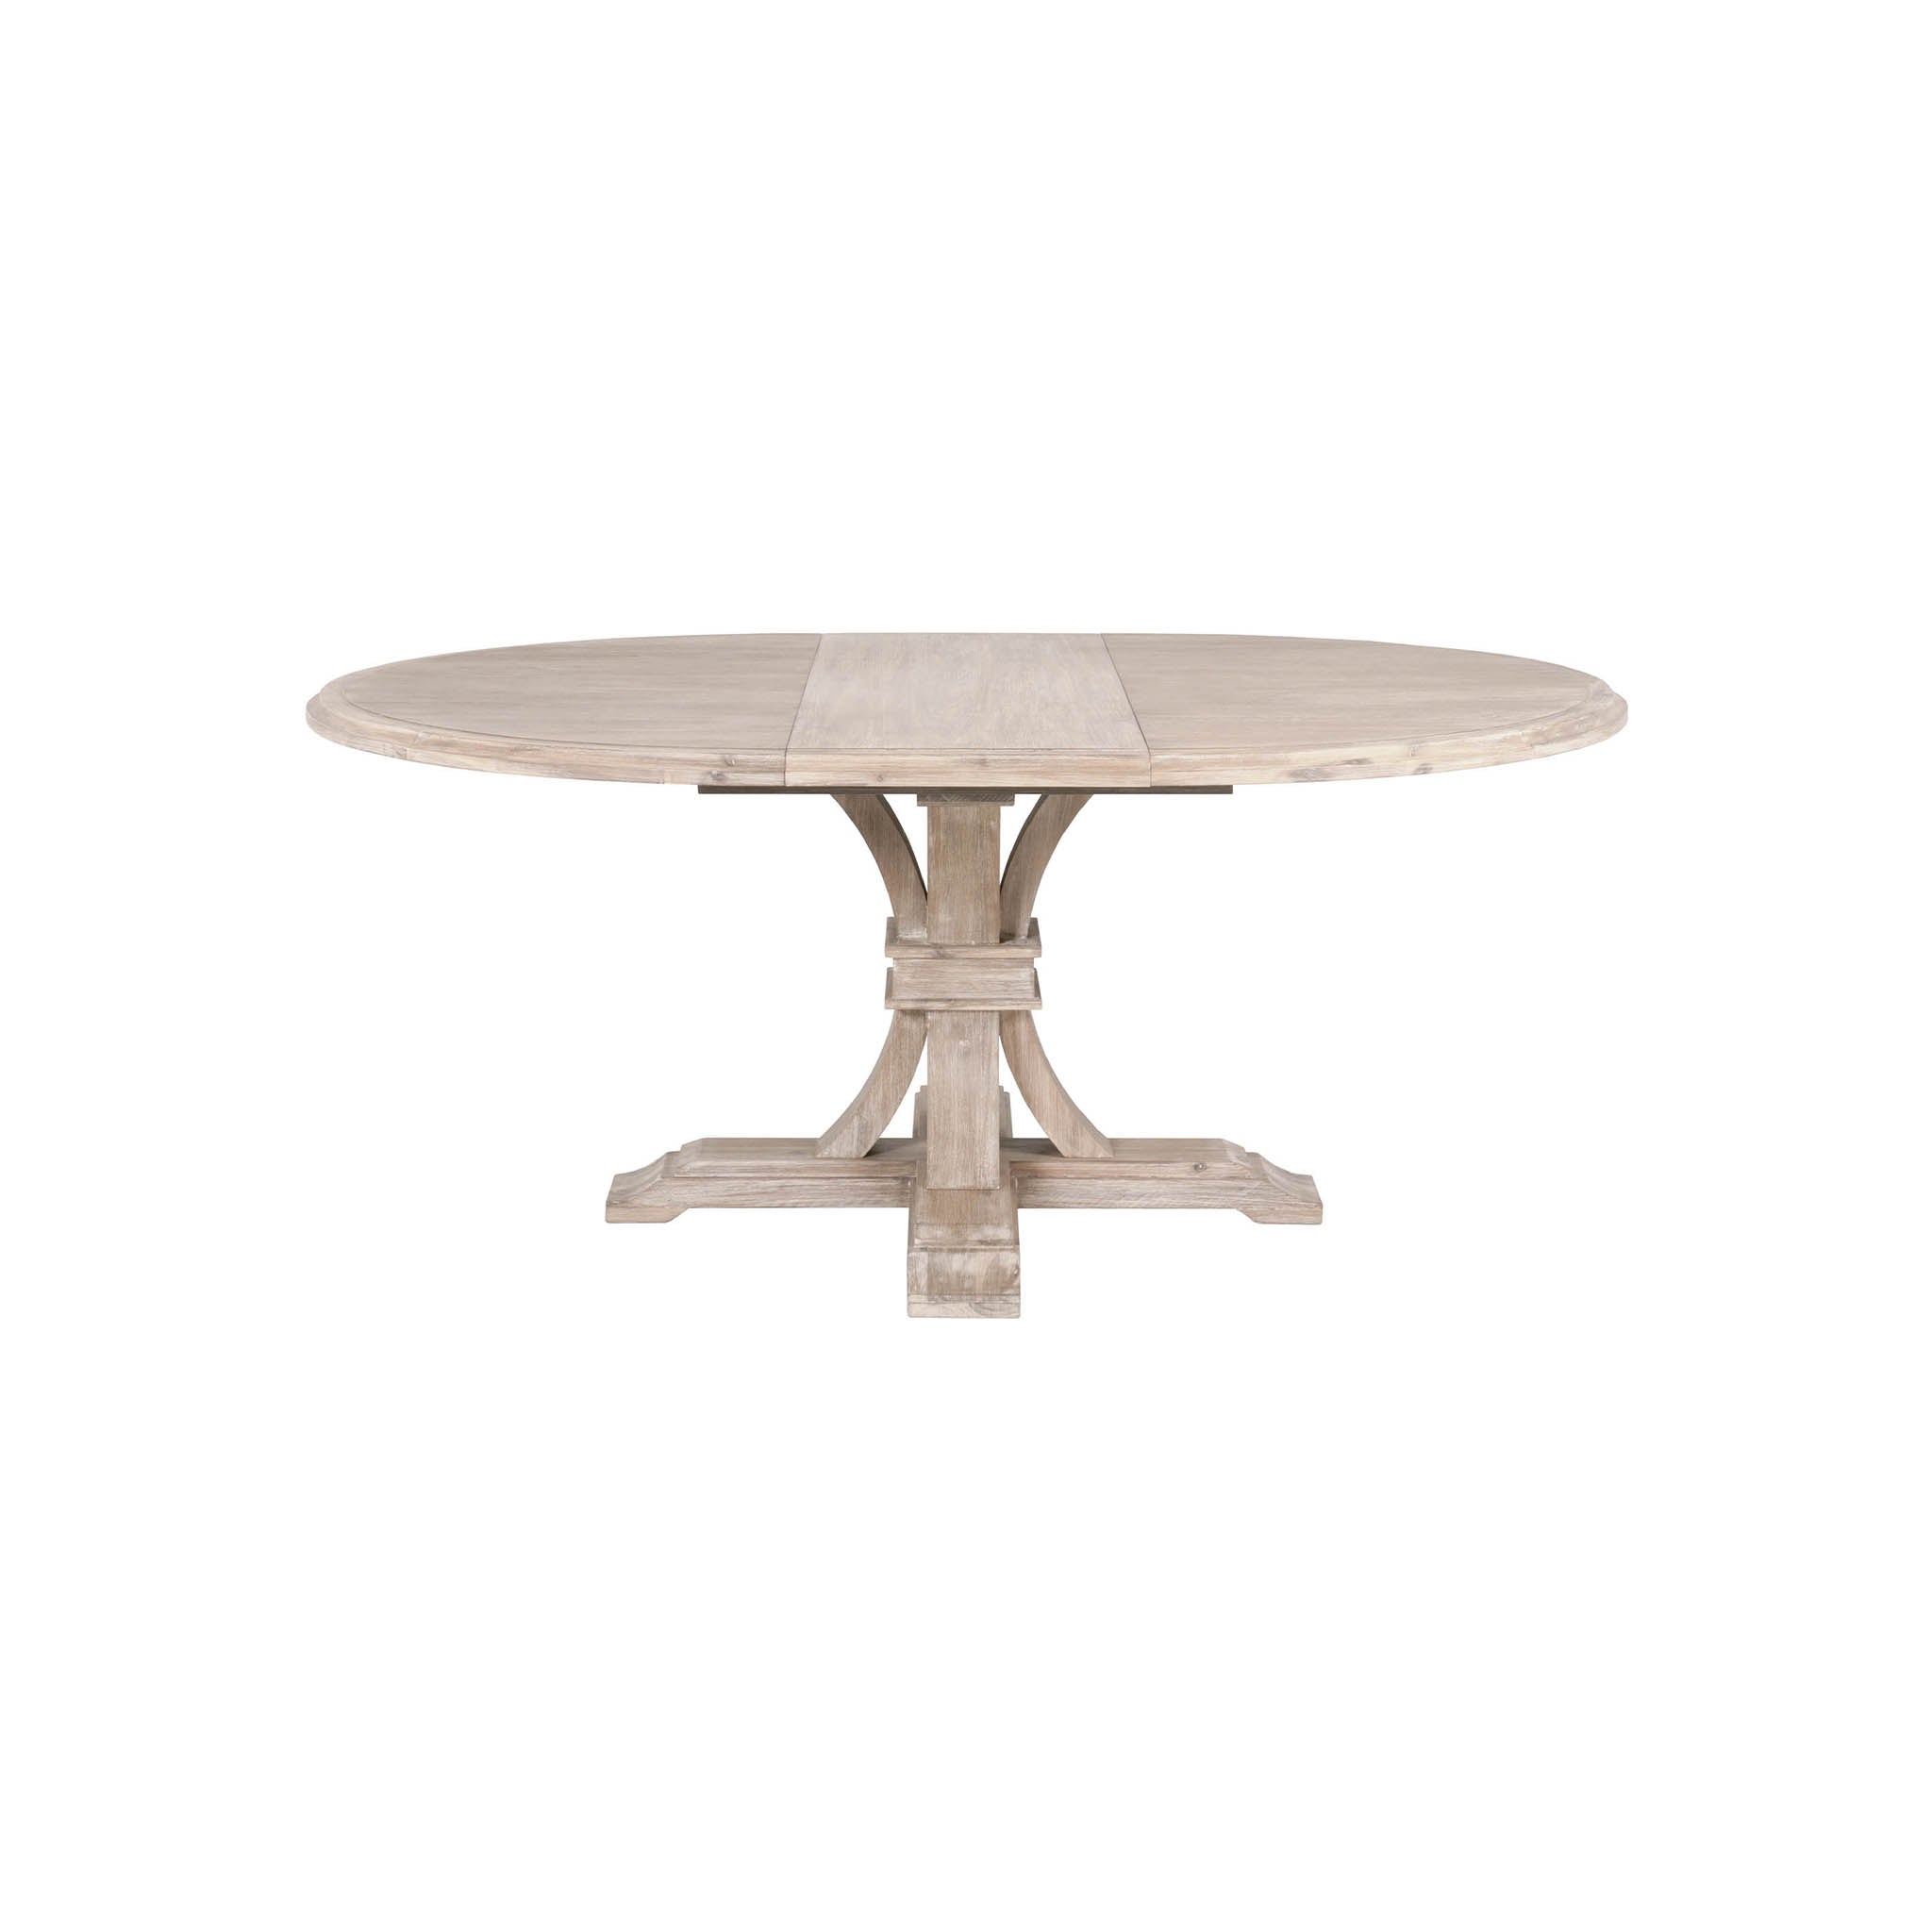 Shropshire 54" Round Extension Dining Table